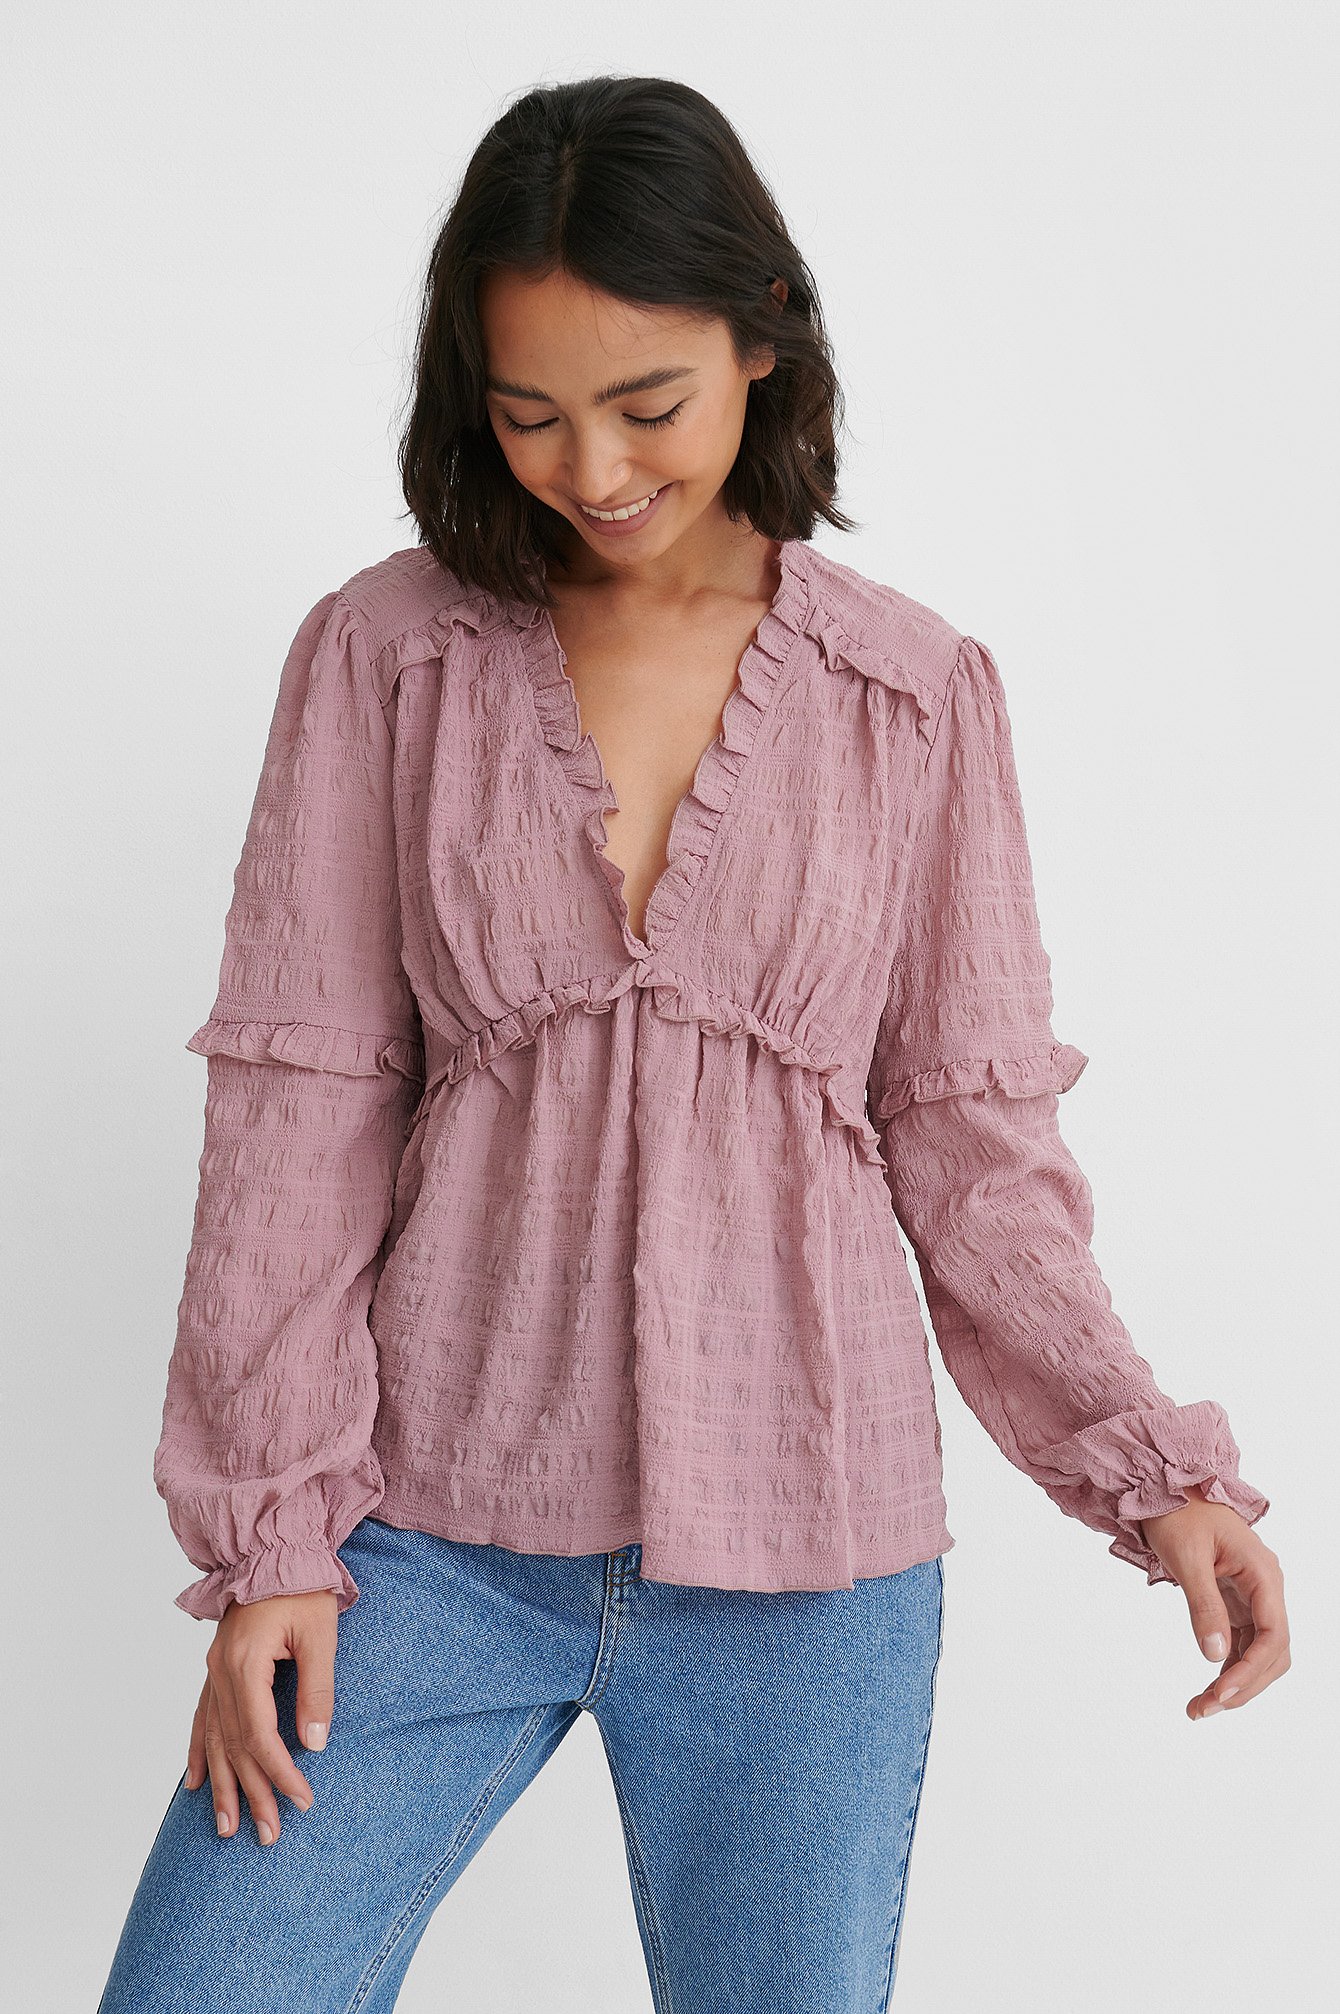 Dusty Dark Pink Structured Frill Blouse